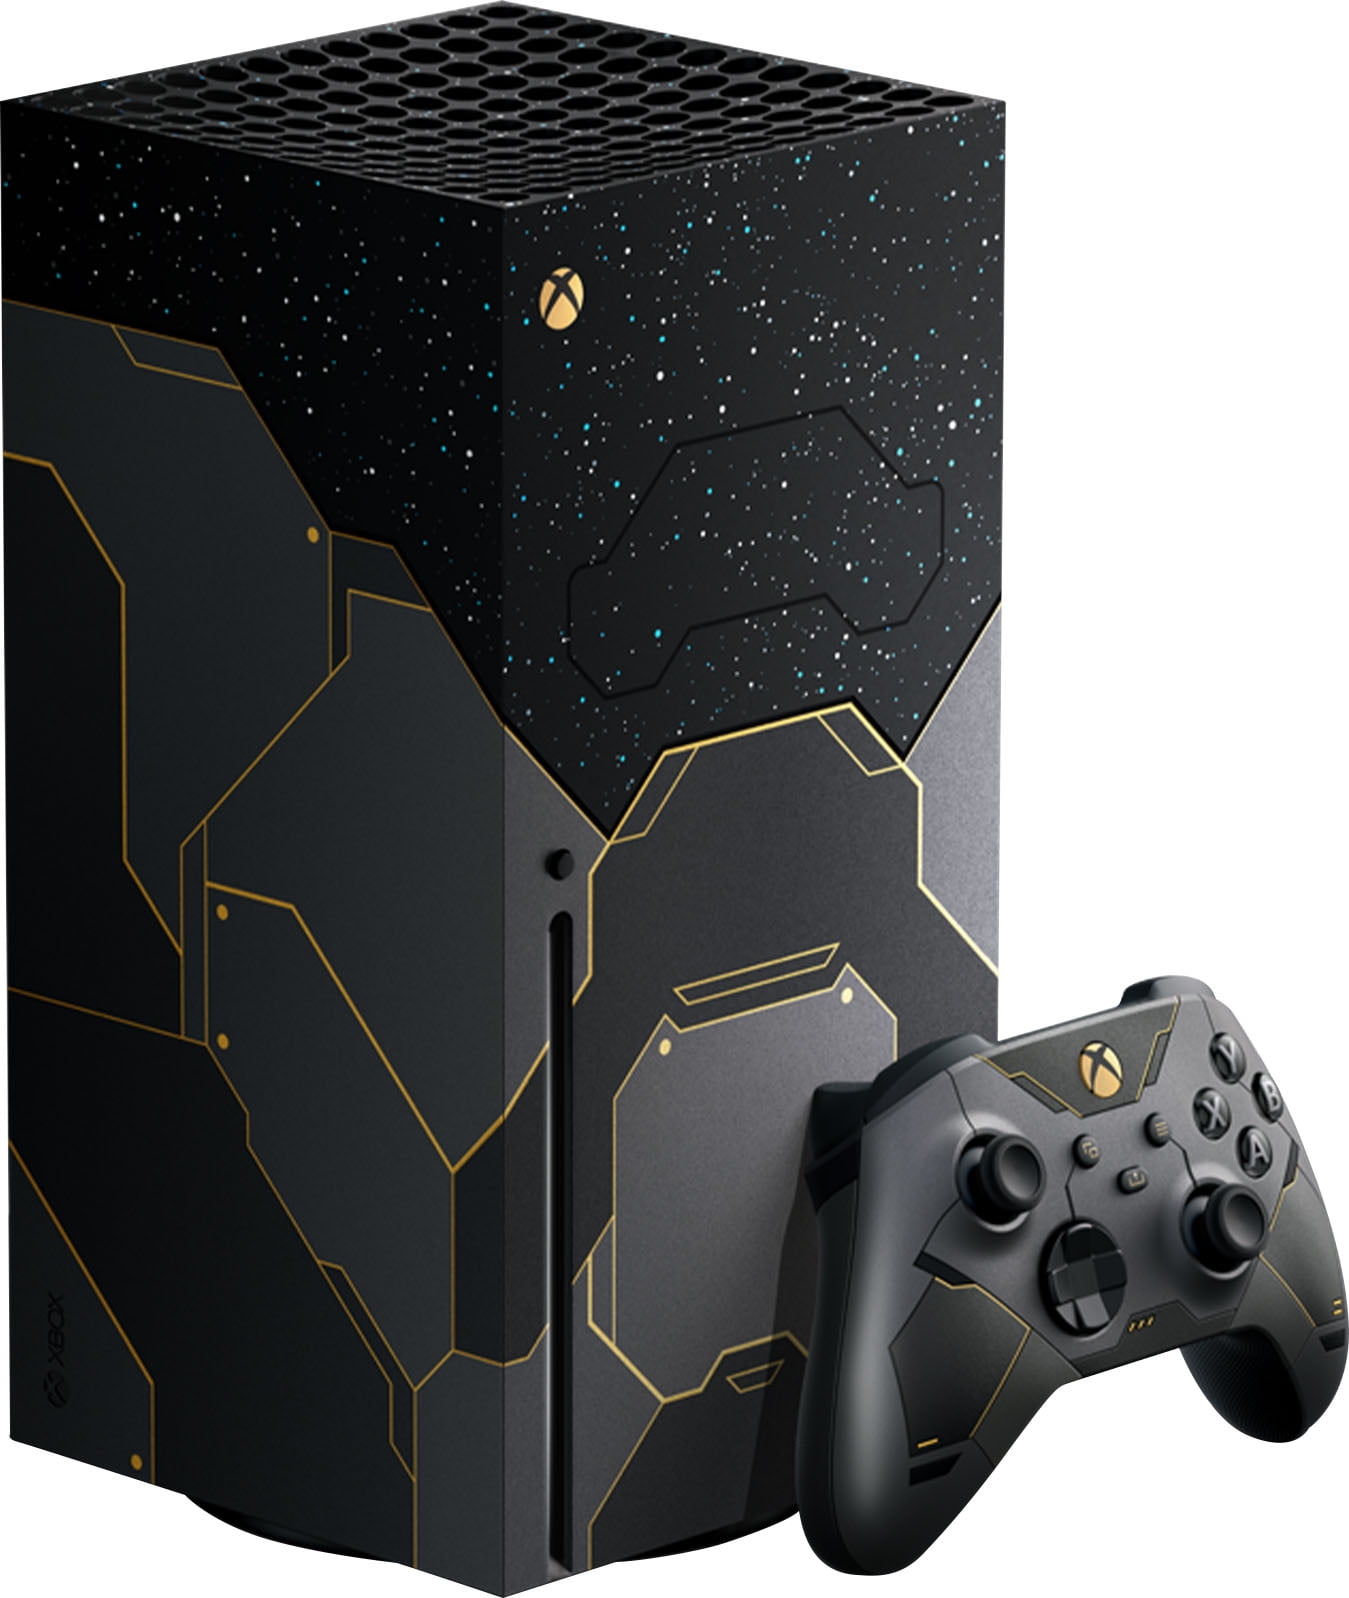 Halo Infinite Xbox Series X and Elite Controller announced, launch November  15 - Neowin